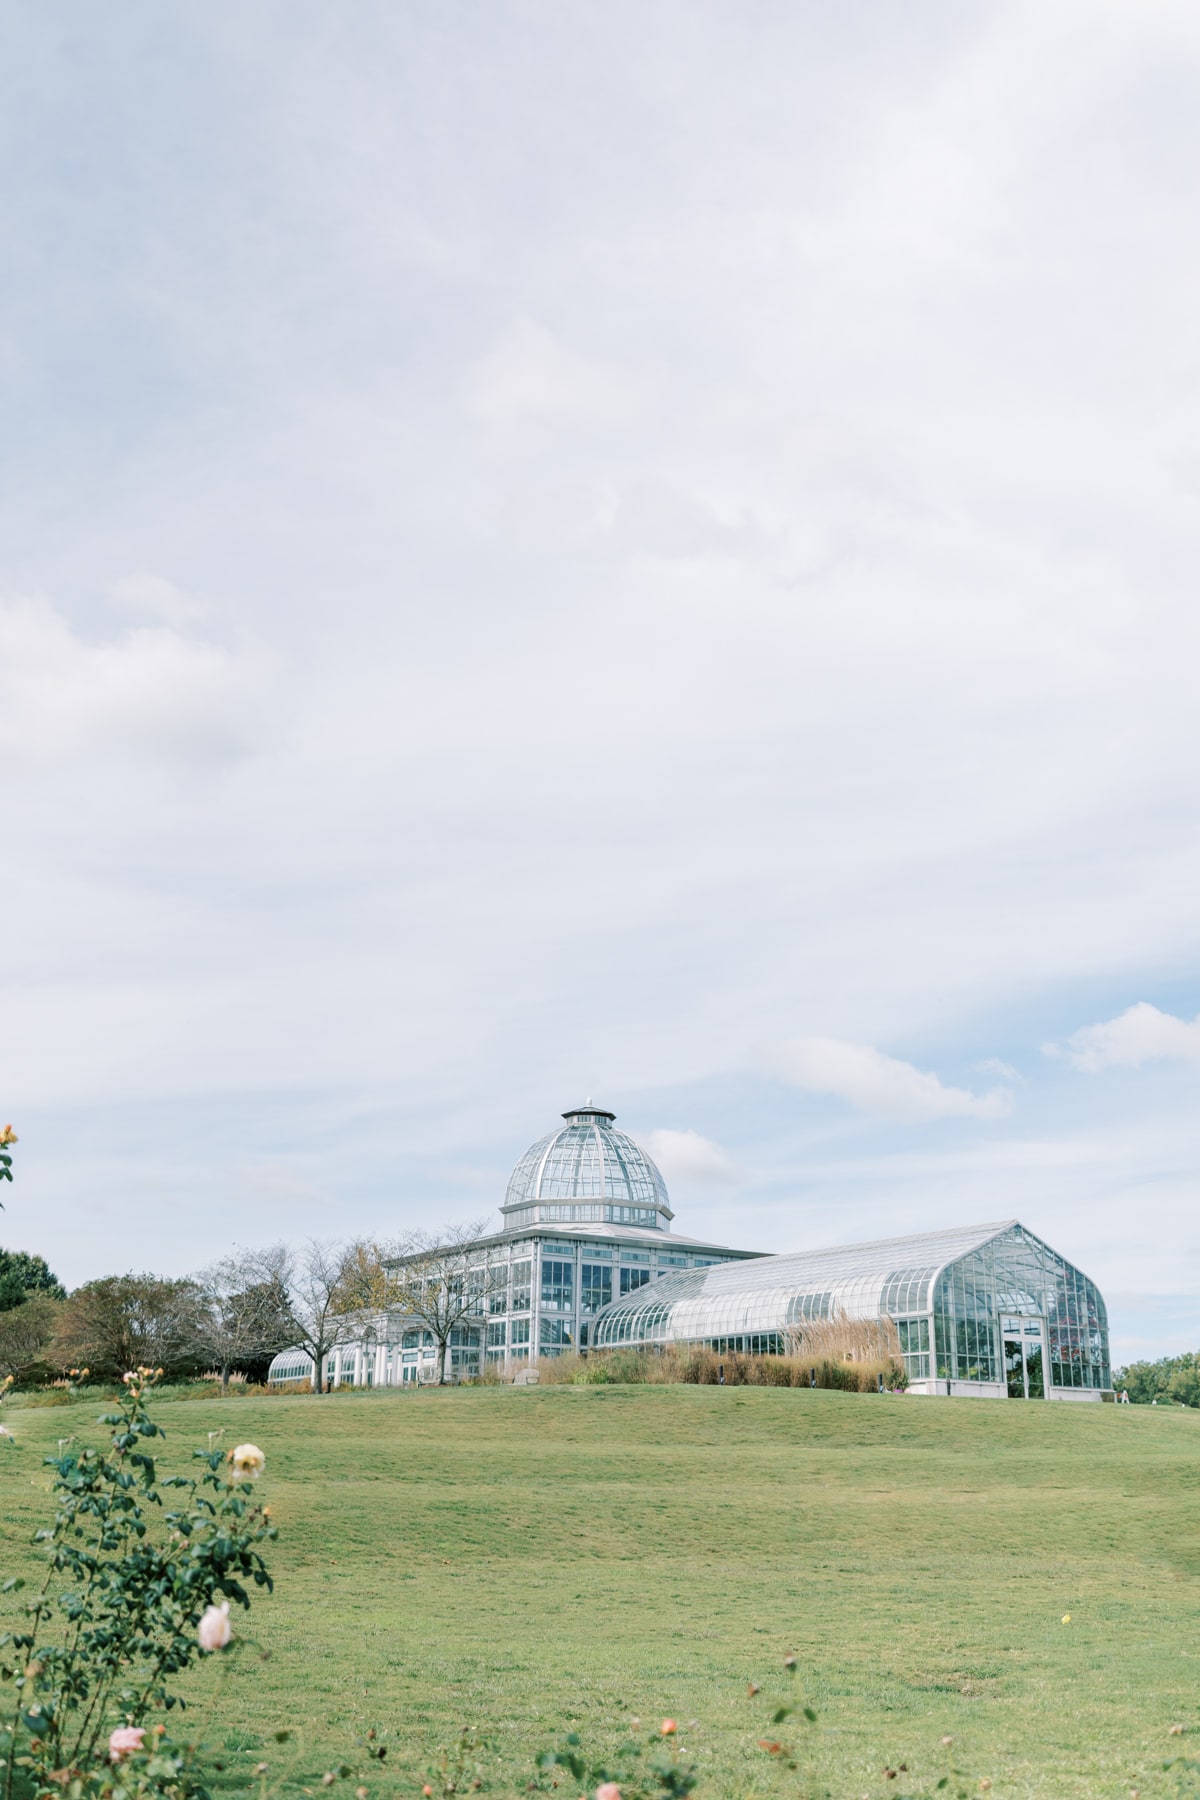 The conservatory space at Lewis Ginter- perfect for photographs of your wedding day!